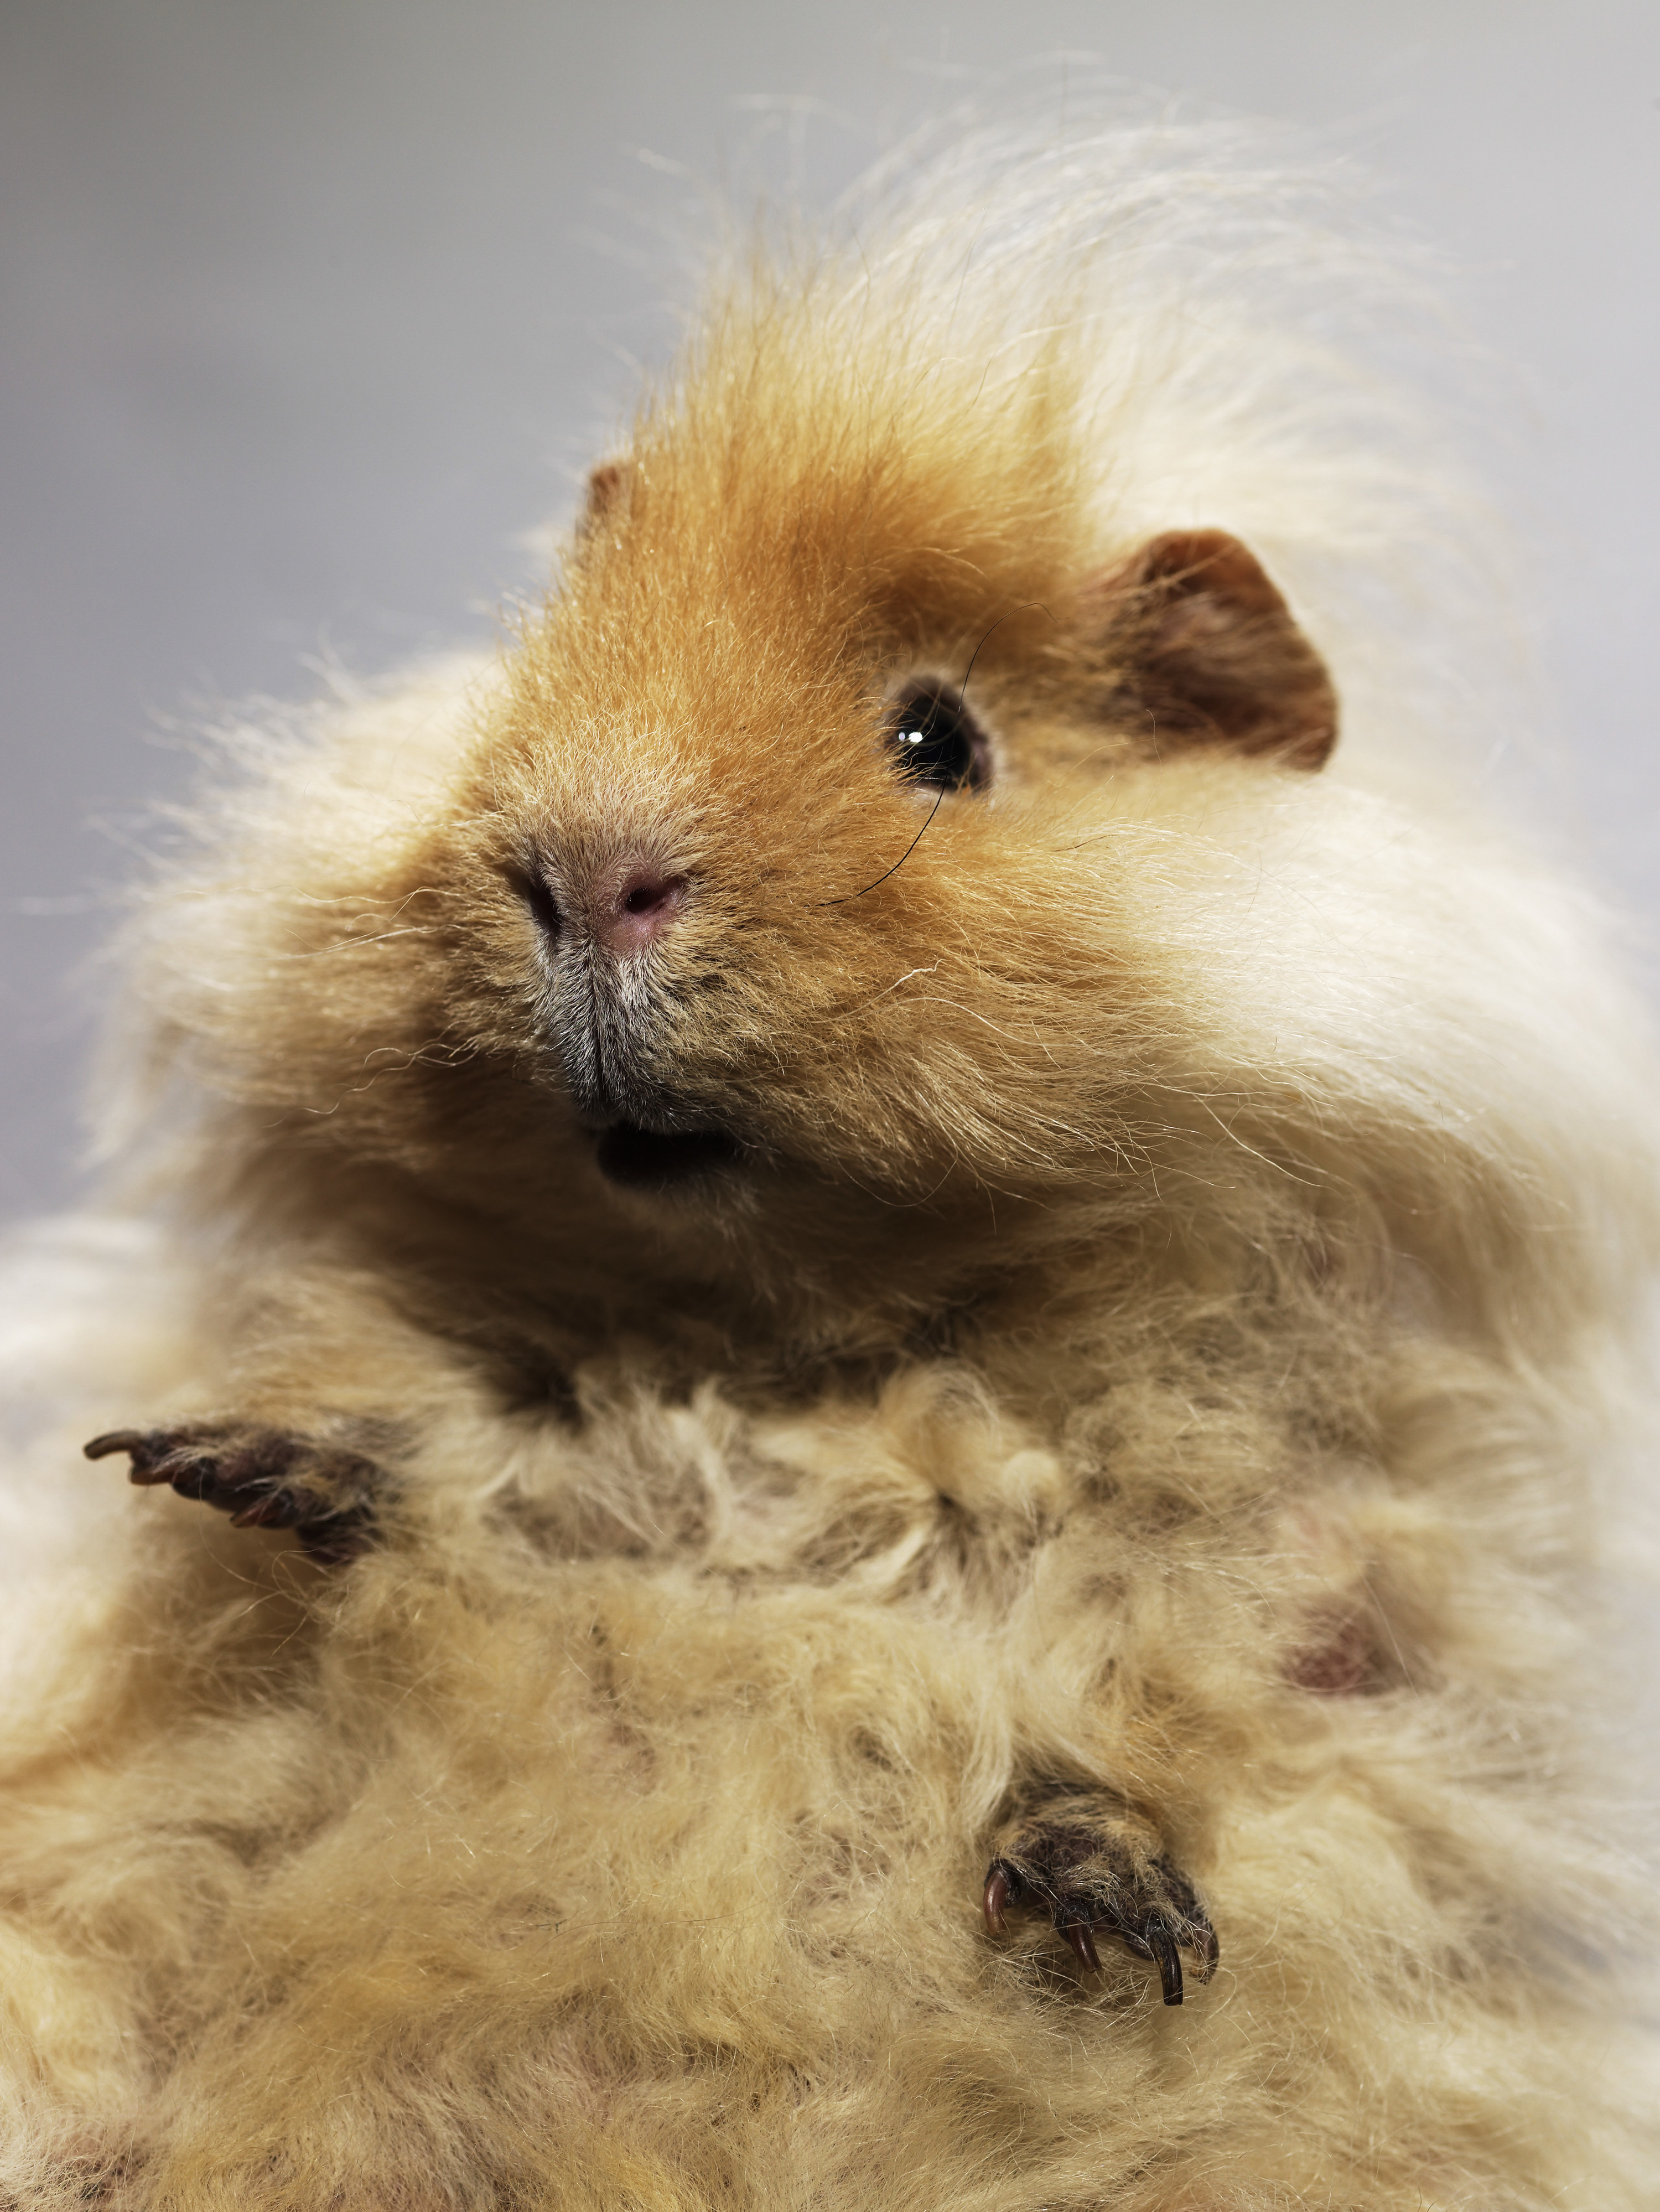 A photo of a guinea pig with wild hair